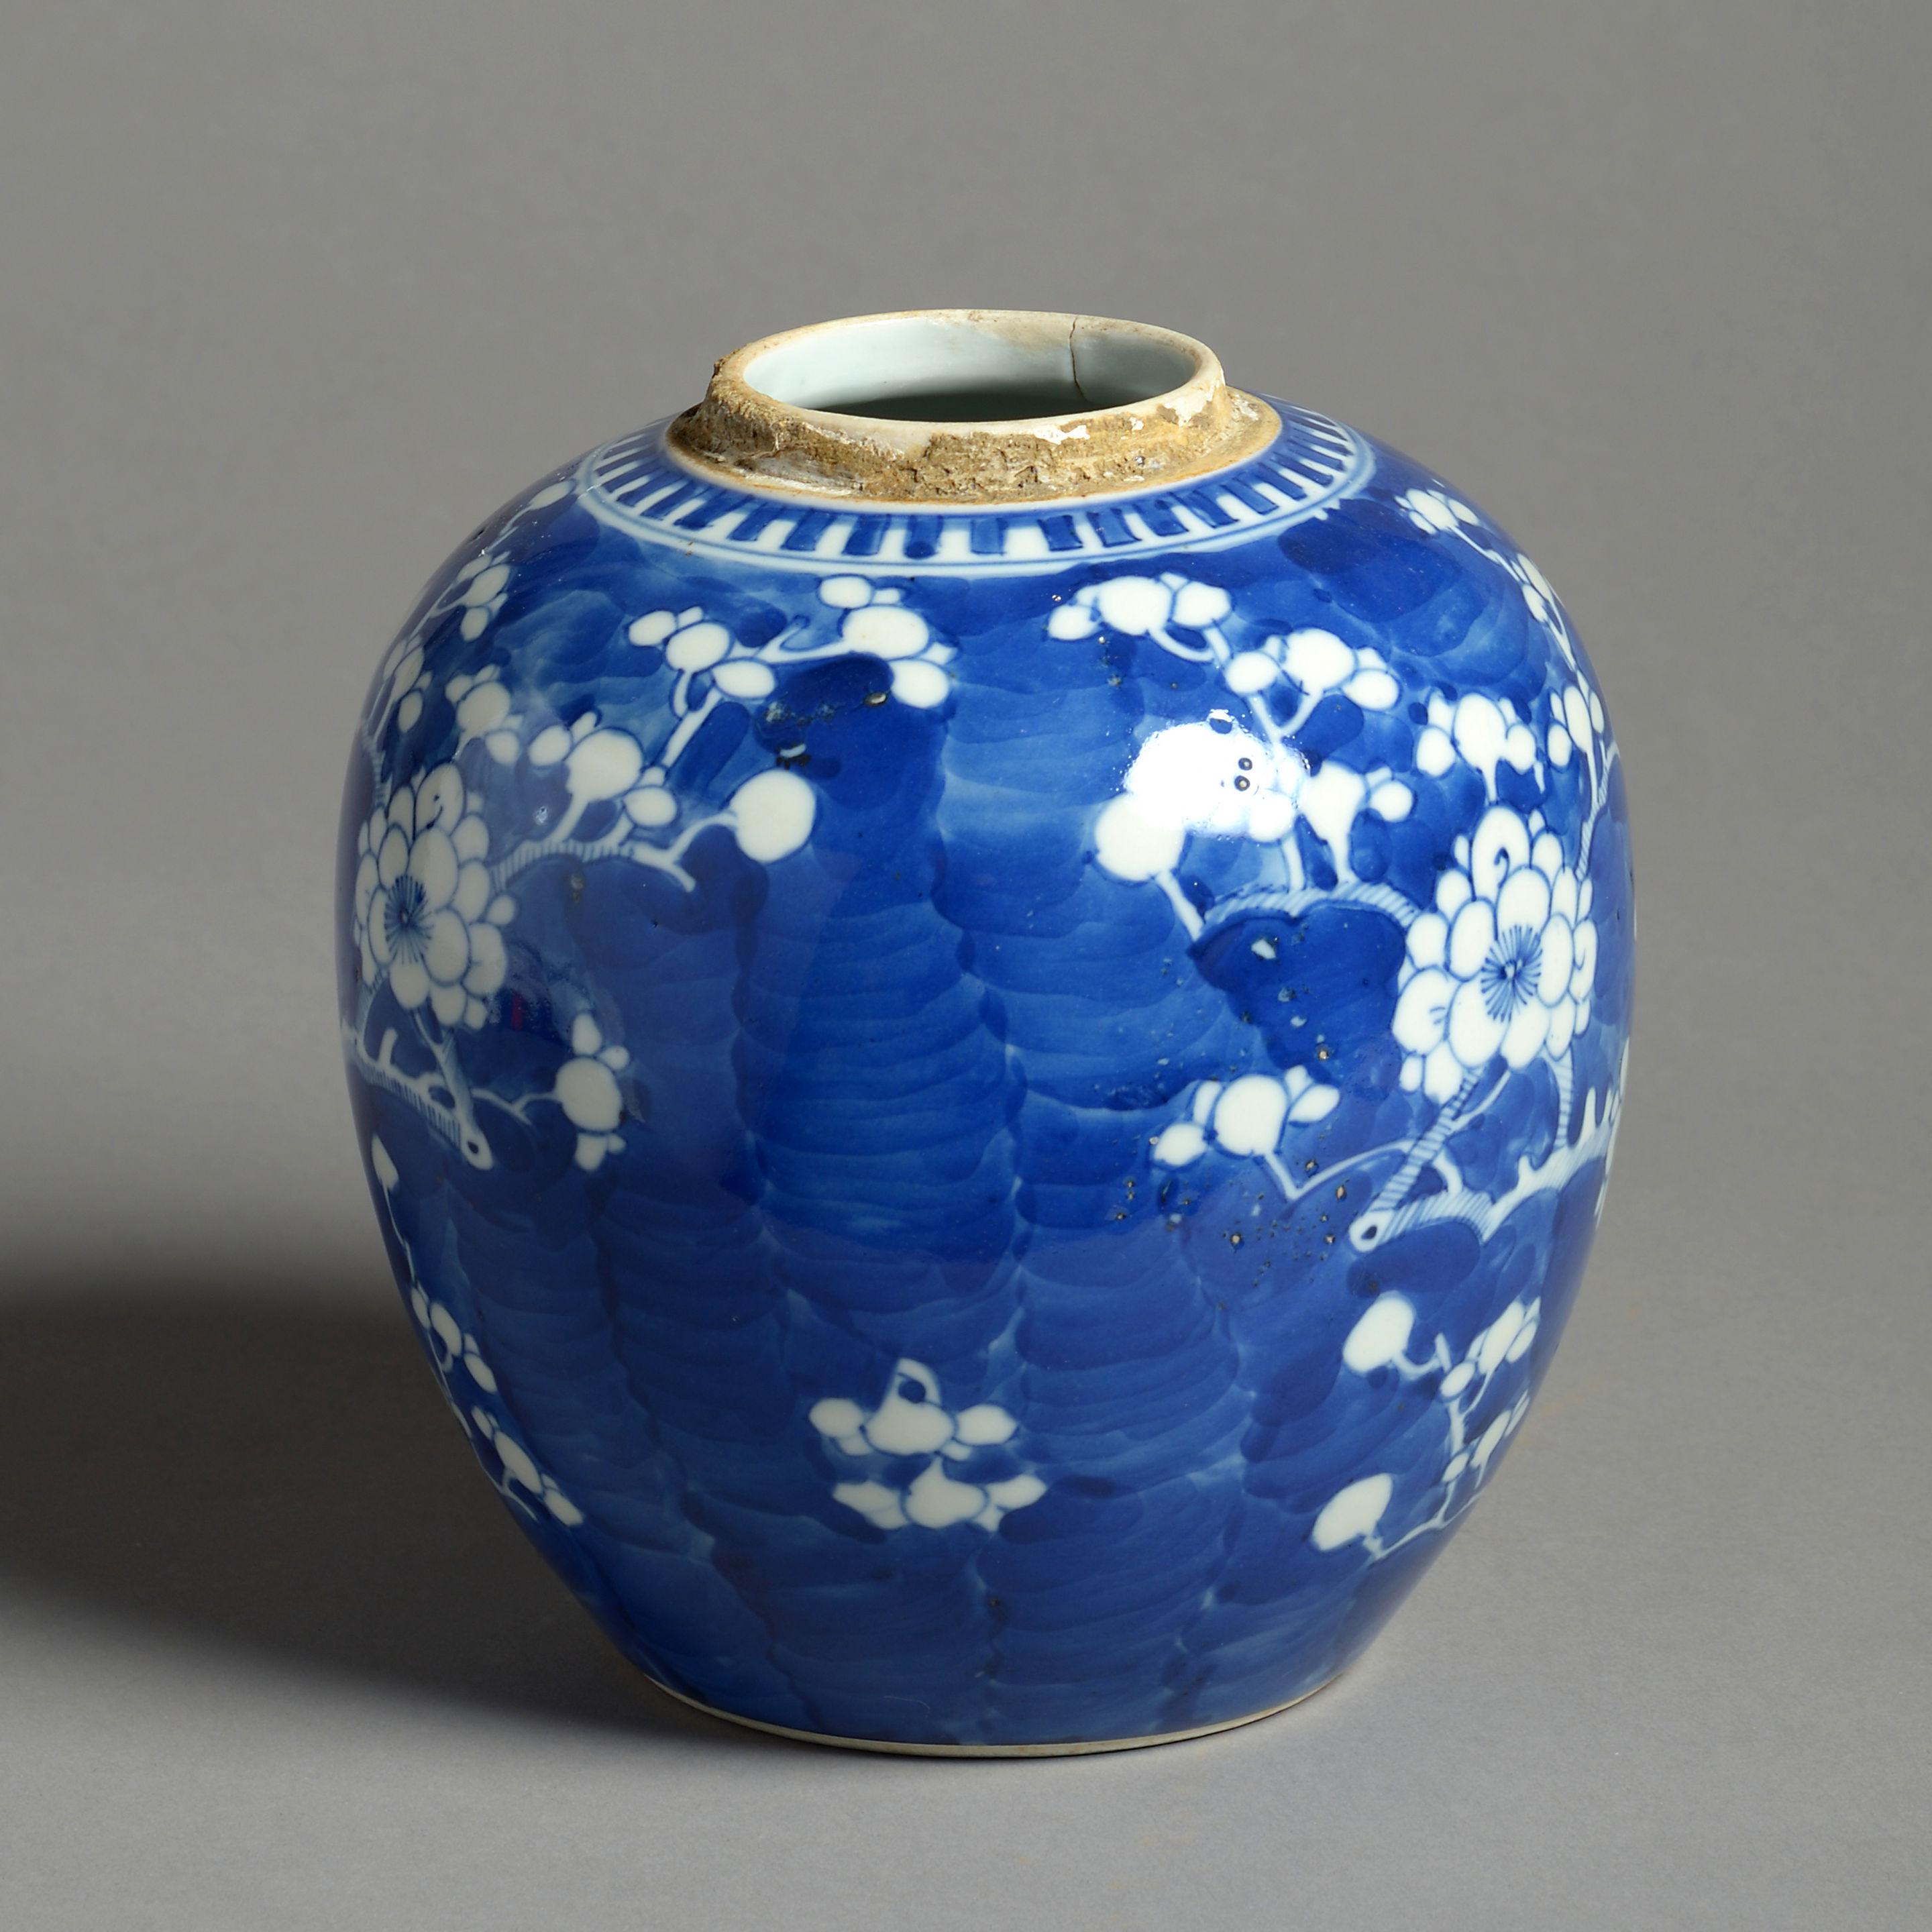 A 19th century blue and white porcelain jar, decorated throughout with stylised prunus blossoms. 

Late Qing Dynasty.